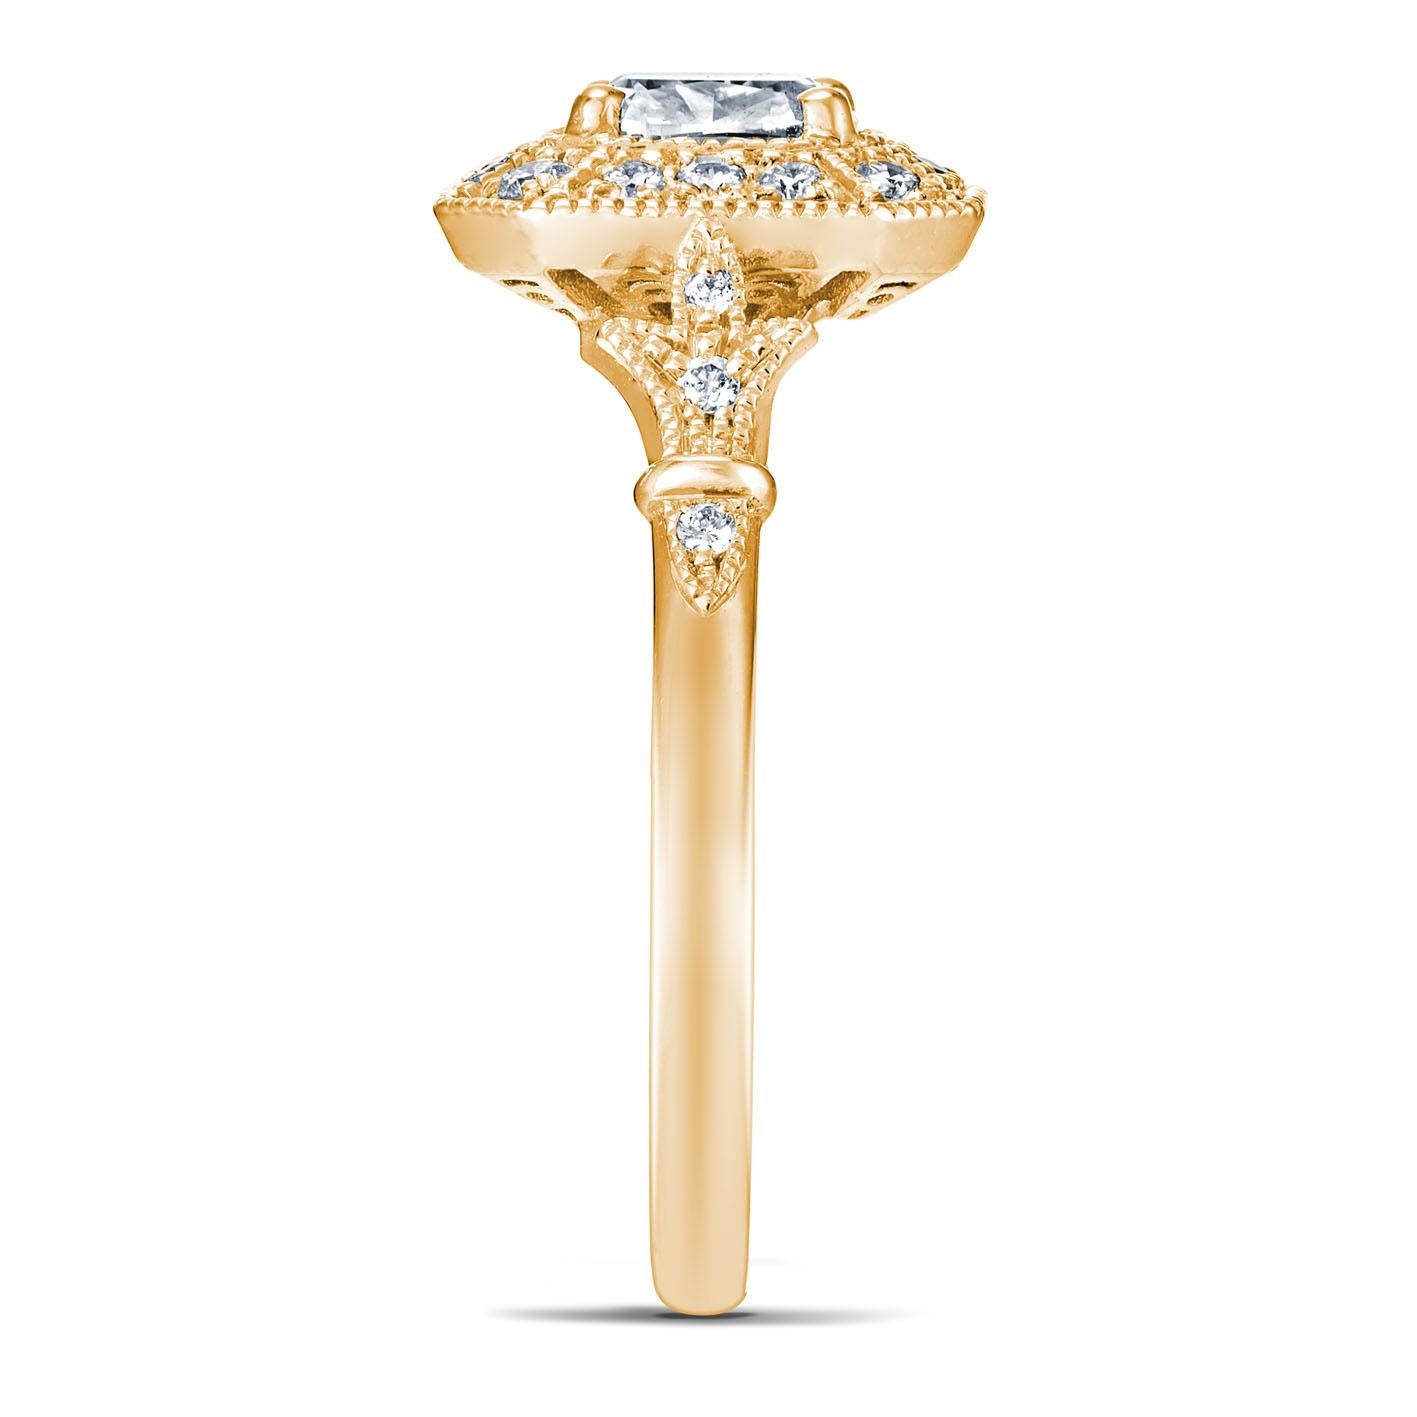 For Sale:  18k Yellow Gold 0.7 Ct Cushion Diamond Ring set with 0.19 Cts of Diamonds 3